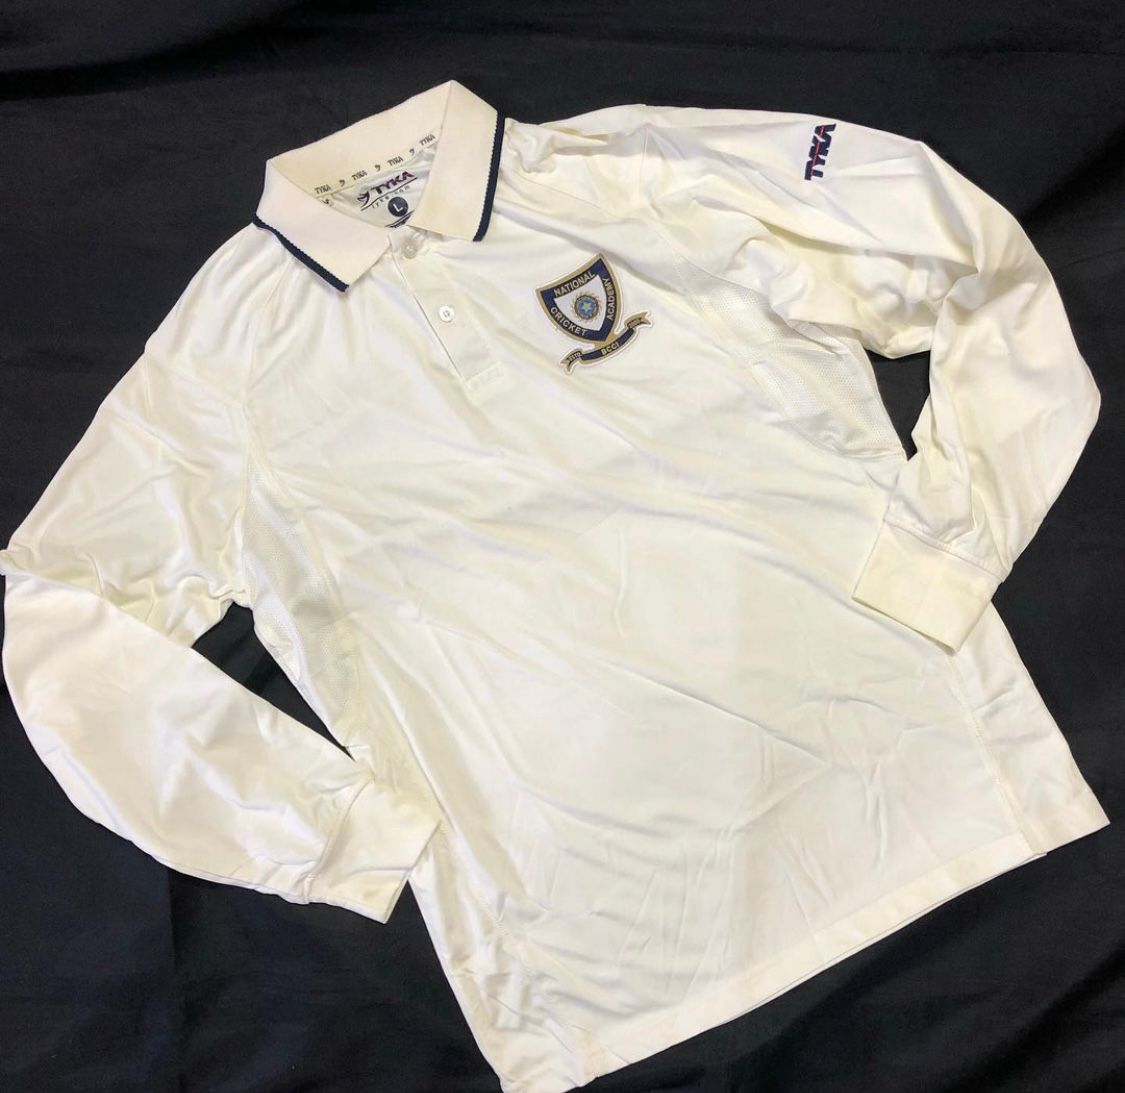 Cricket Trouser and Shirt For Men's (Wembley) | eBay